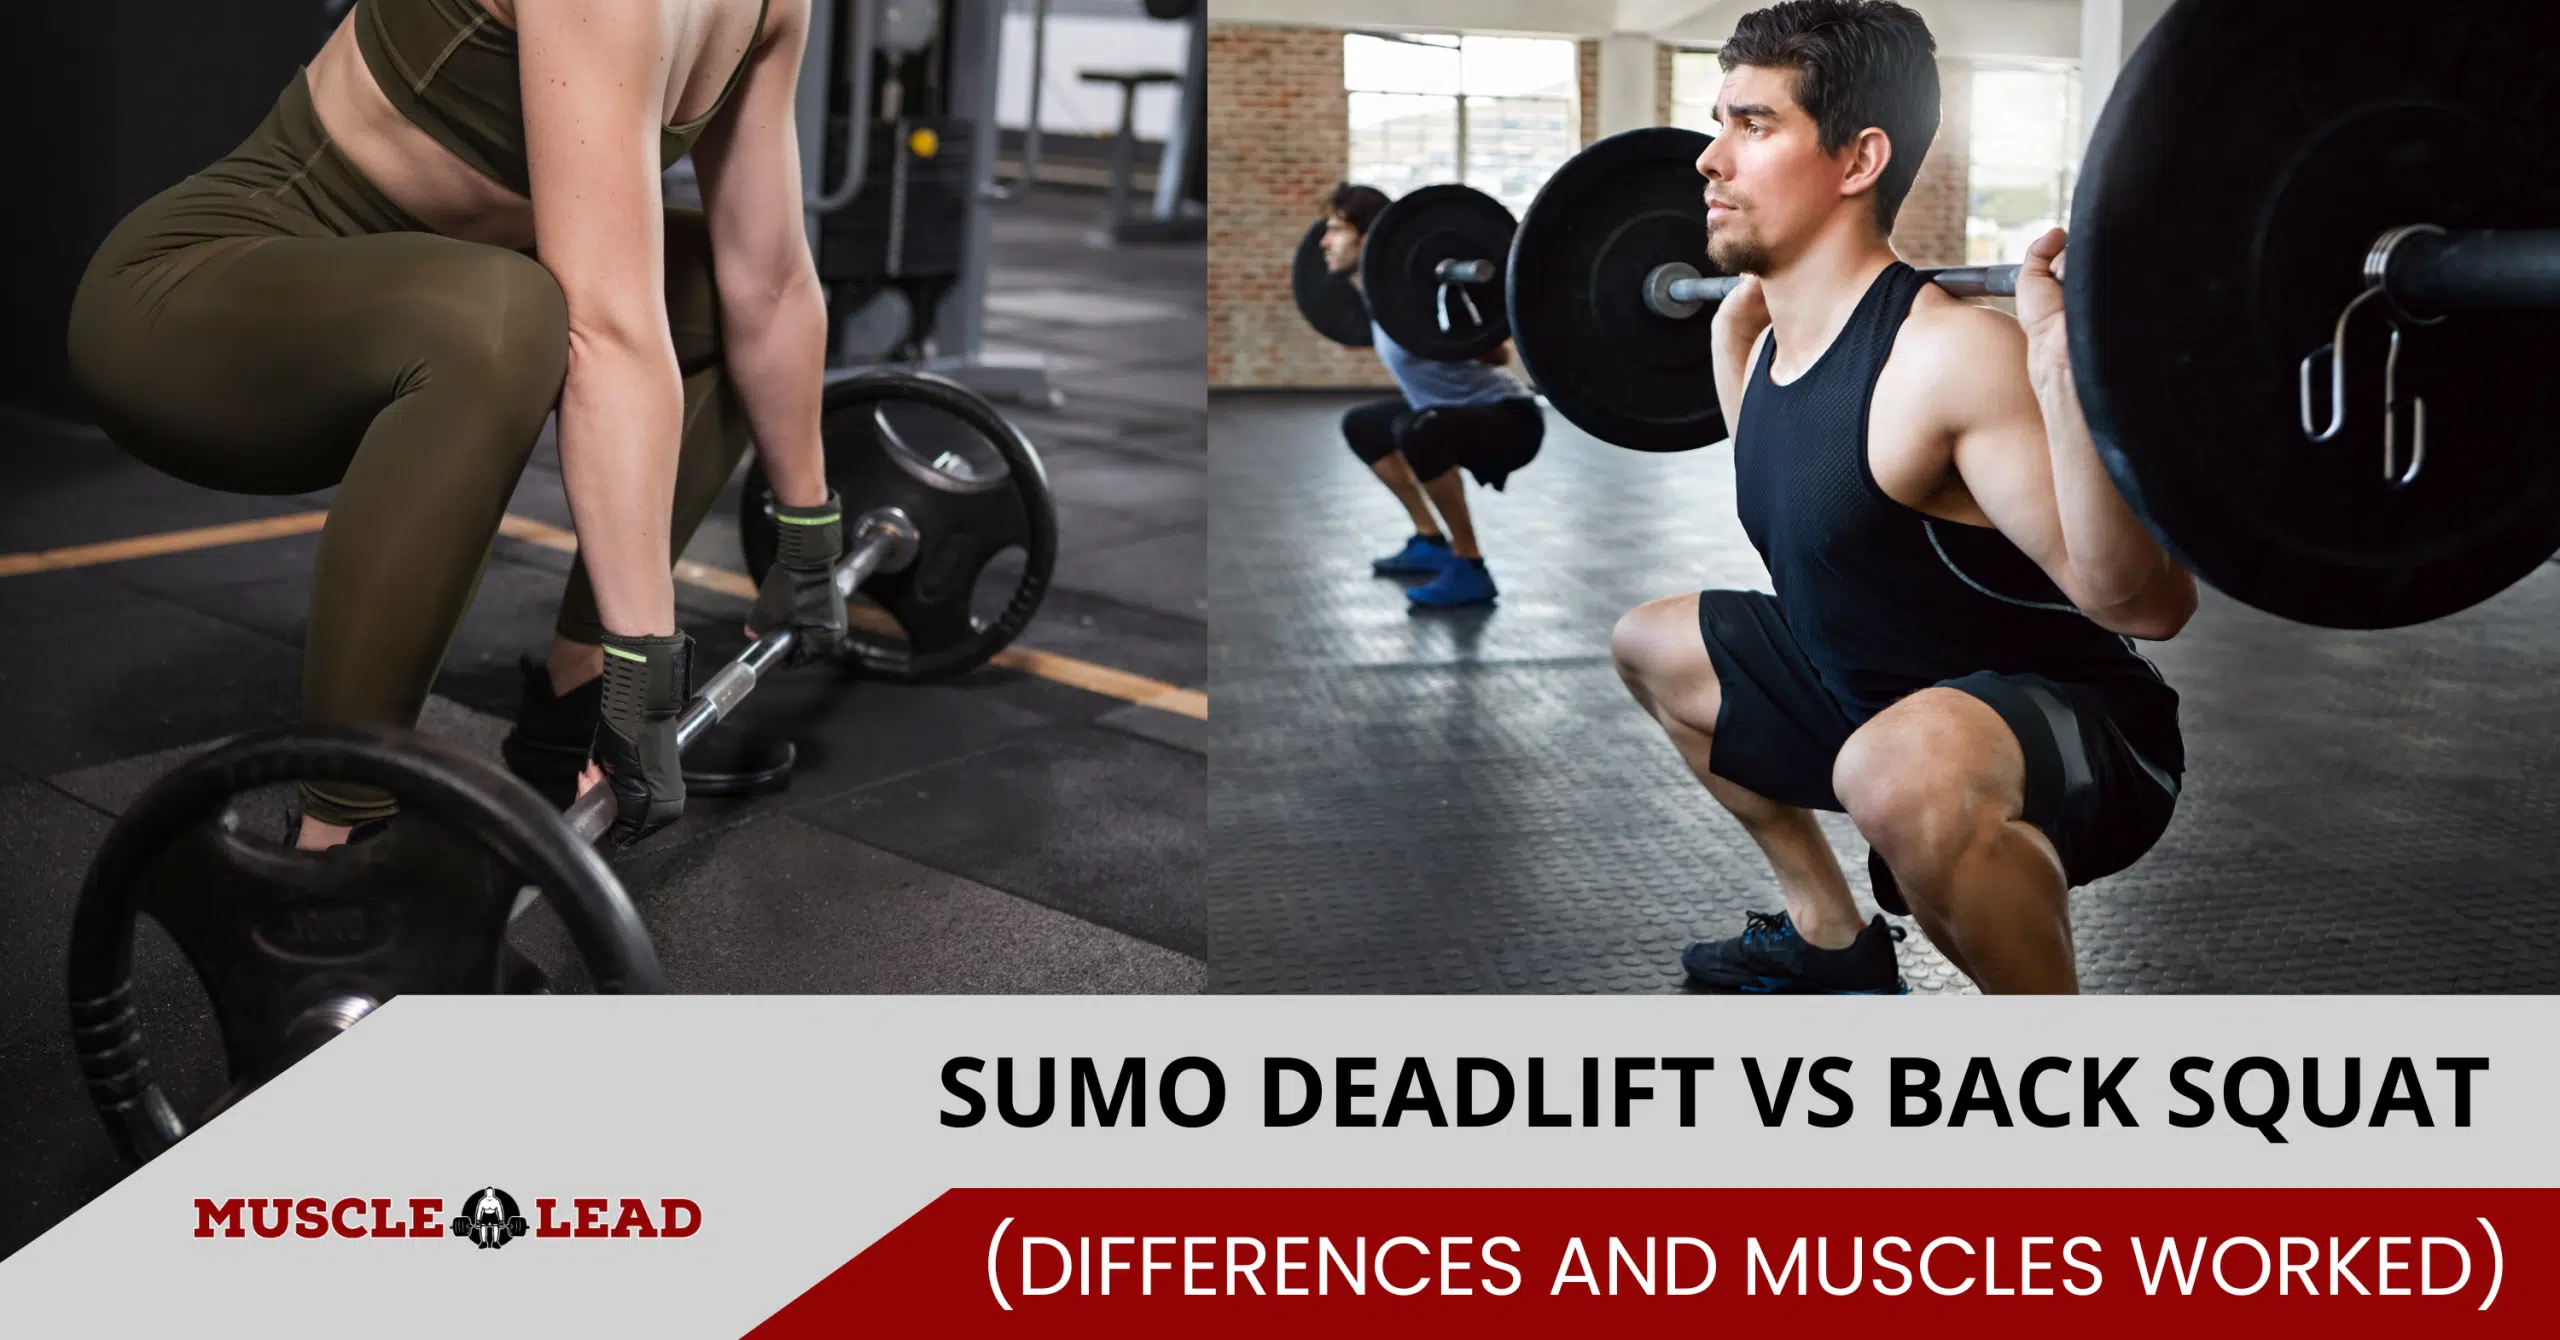 Sumo Deadlift vs Back Squat Differences and Muscles Worked